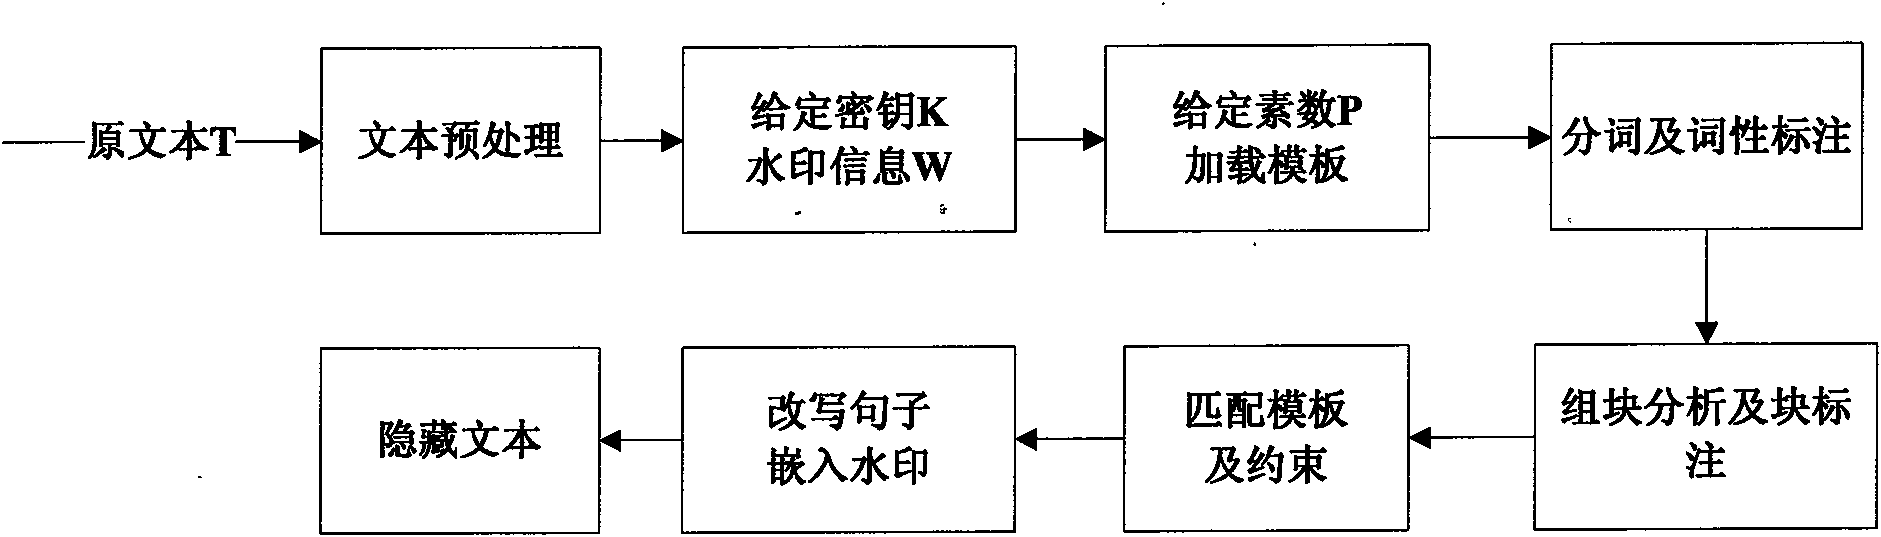 Text hidden method based on Chinese sentence pattern template transformation